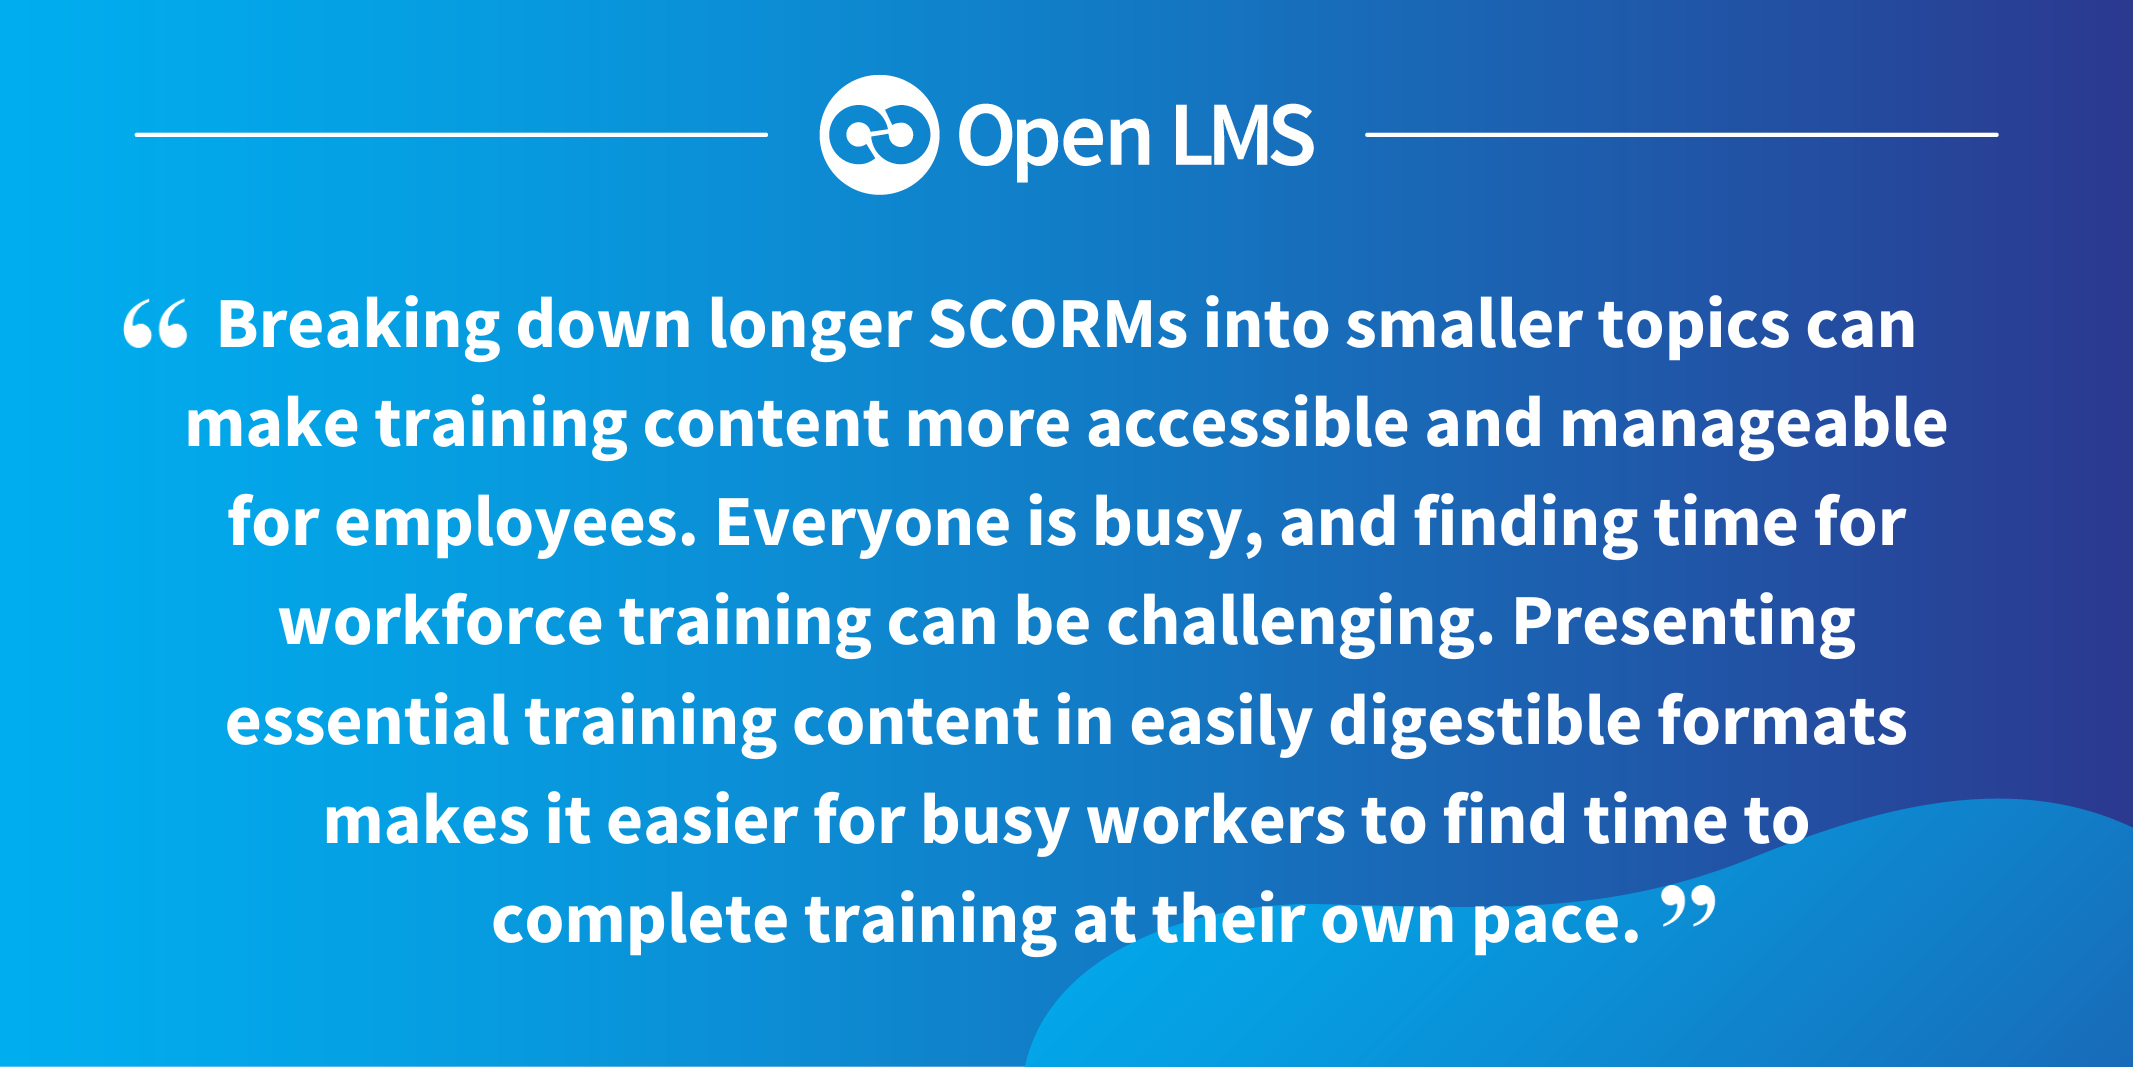 Breaking down longer SCORMs into smaller topics can make training content more accessible and manageable for employees. Everyone is busy, and finding time for workforce training can be challenging. Presenting essential training content in easily digestible formats makes it easier for busy workers to find time to complete training at their own pace